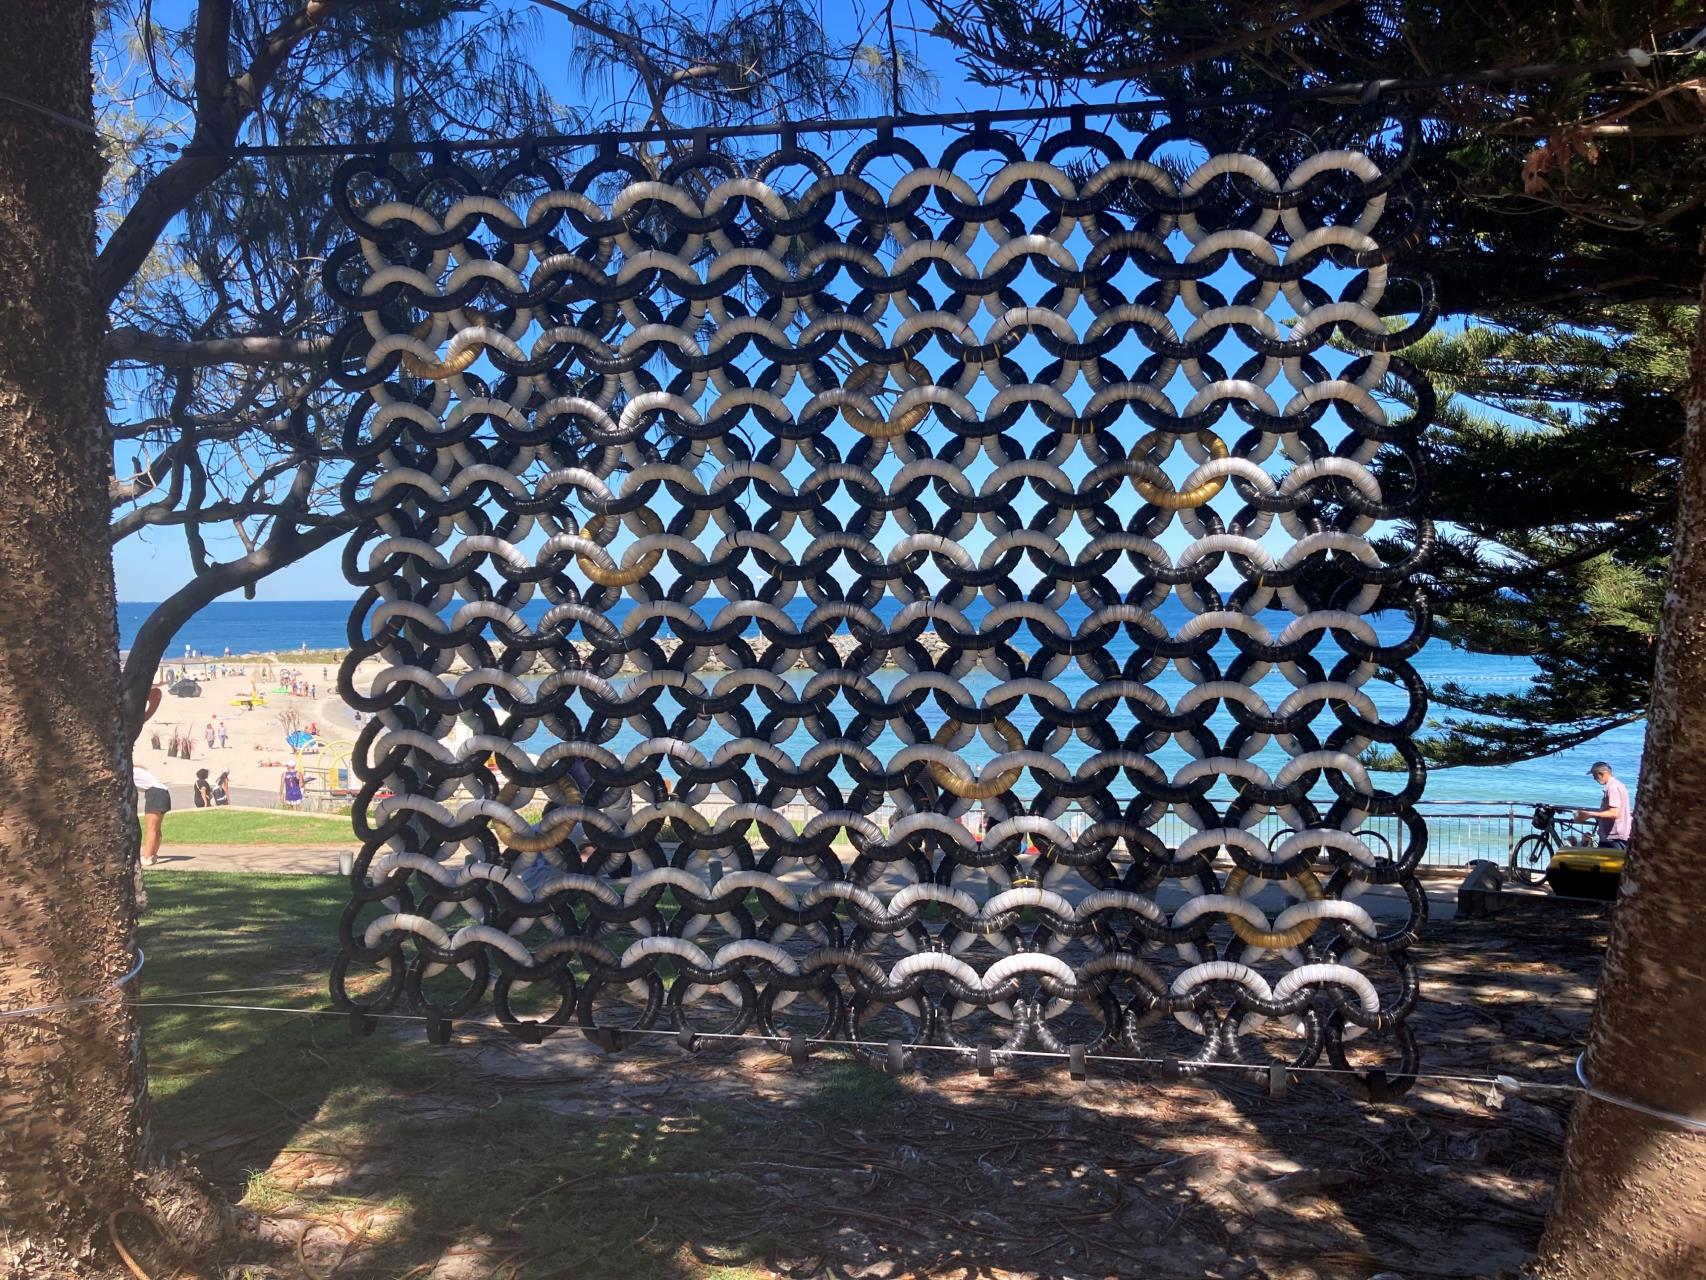 ANOTHER AMAZING SCULPTURE BY THE SEA!